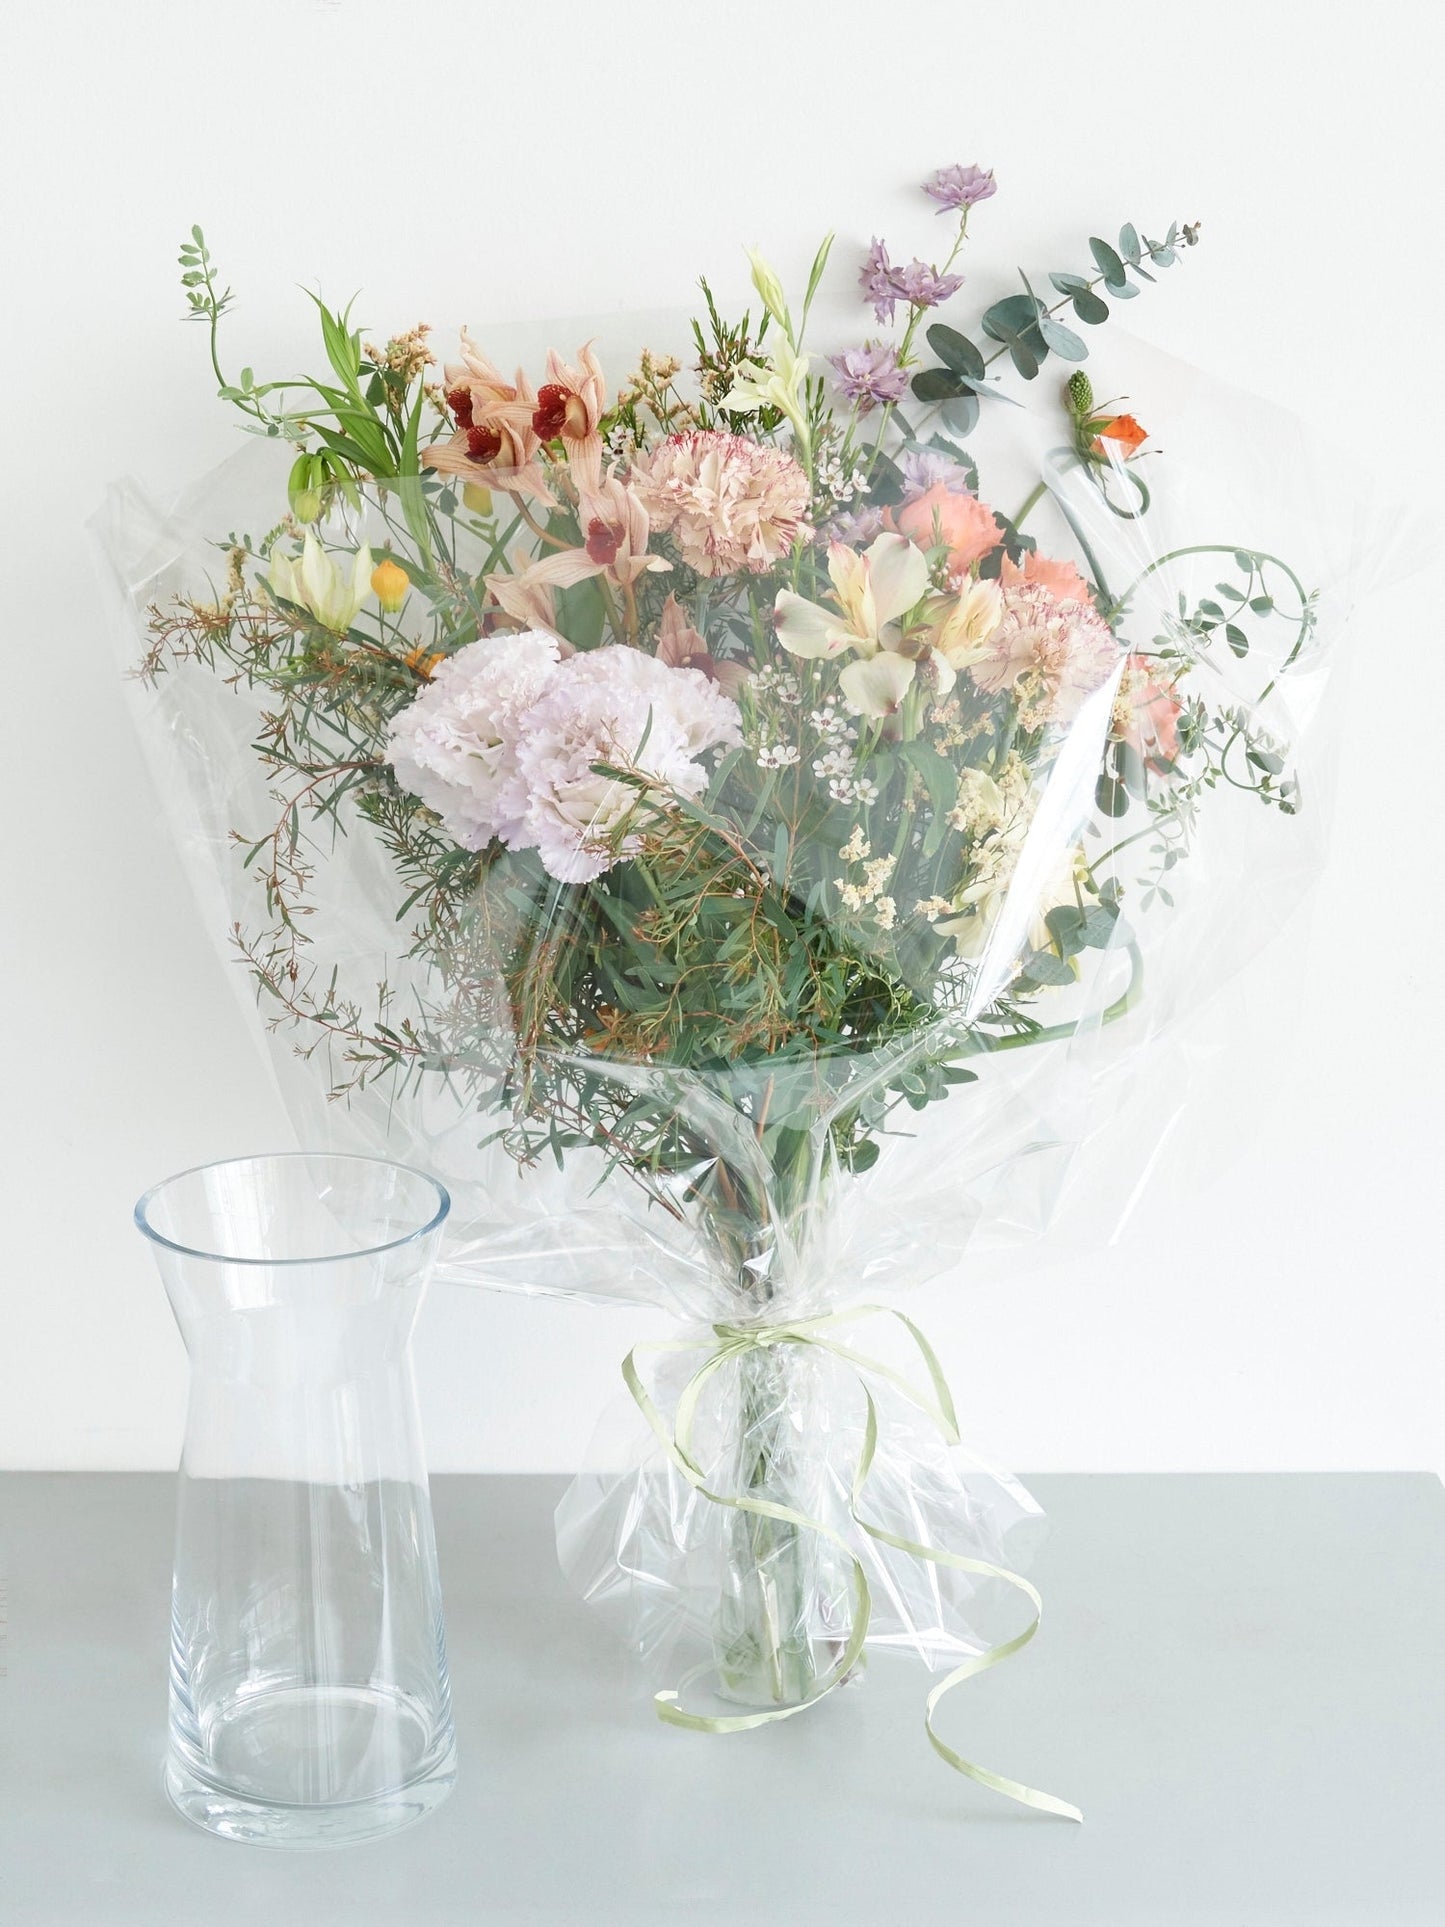 【mother's day】bouquet L and vase set 【Delivery date: 5/11 (Sat)】